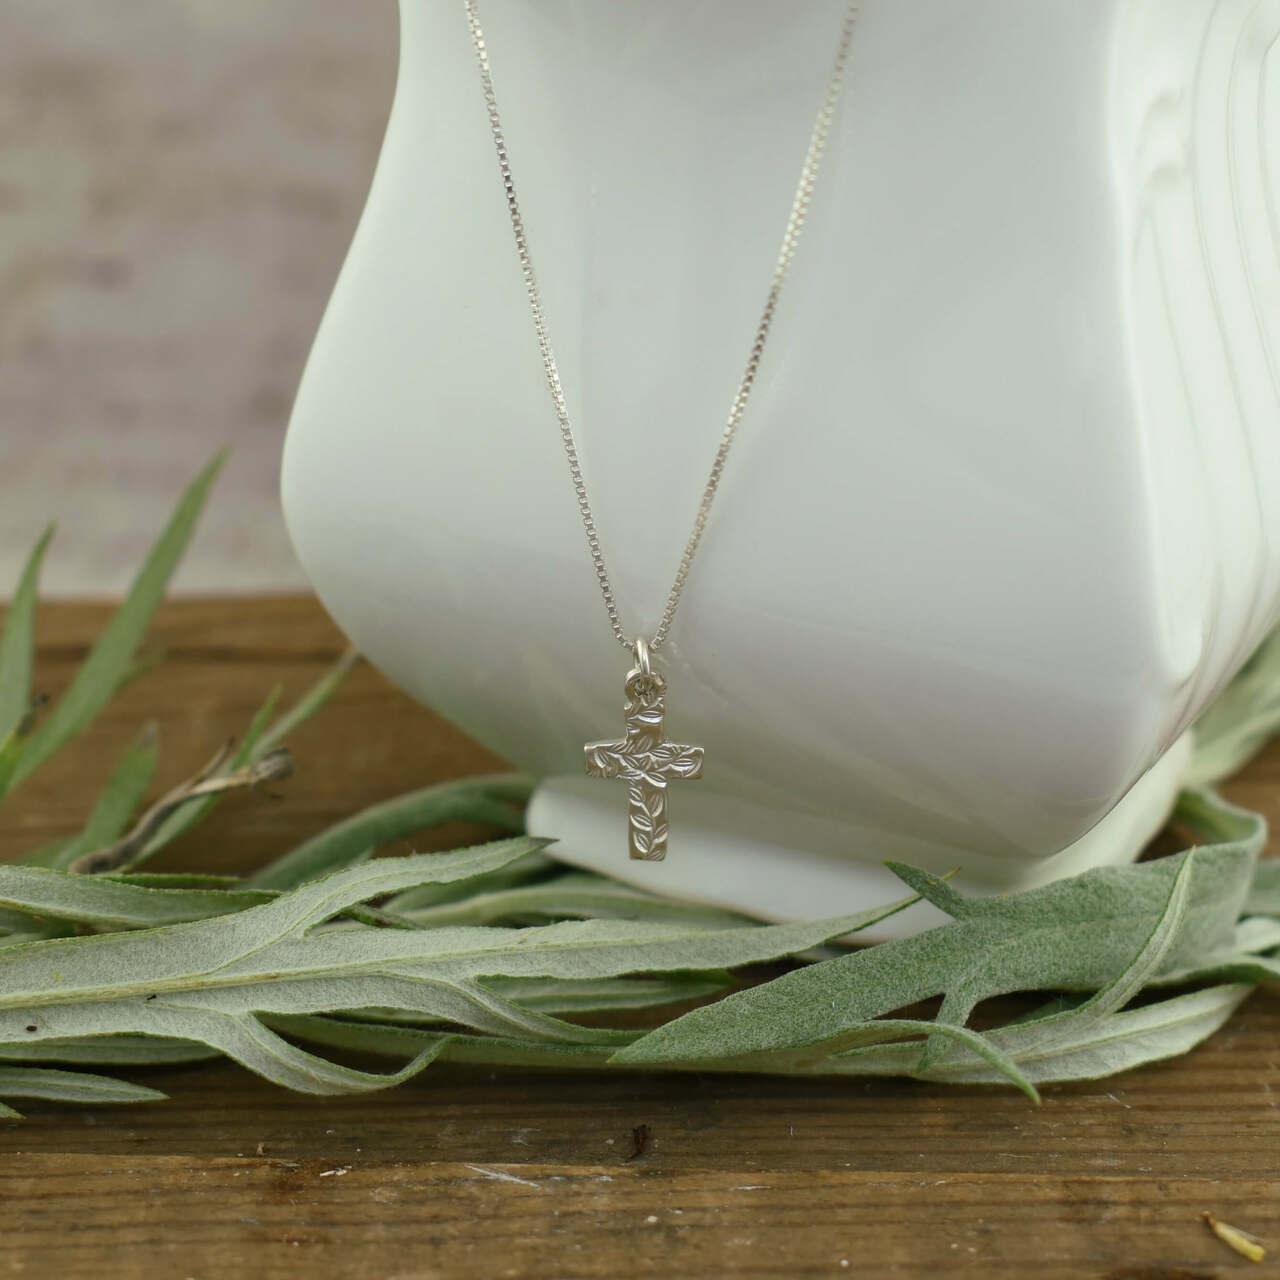 Handcrafted The Vine Necklace in .925 sterling silver